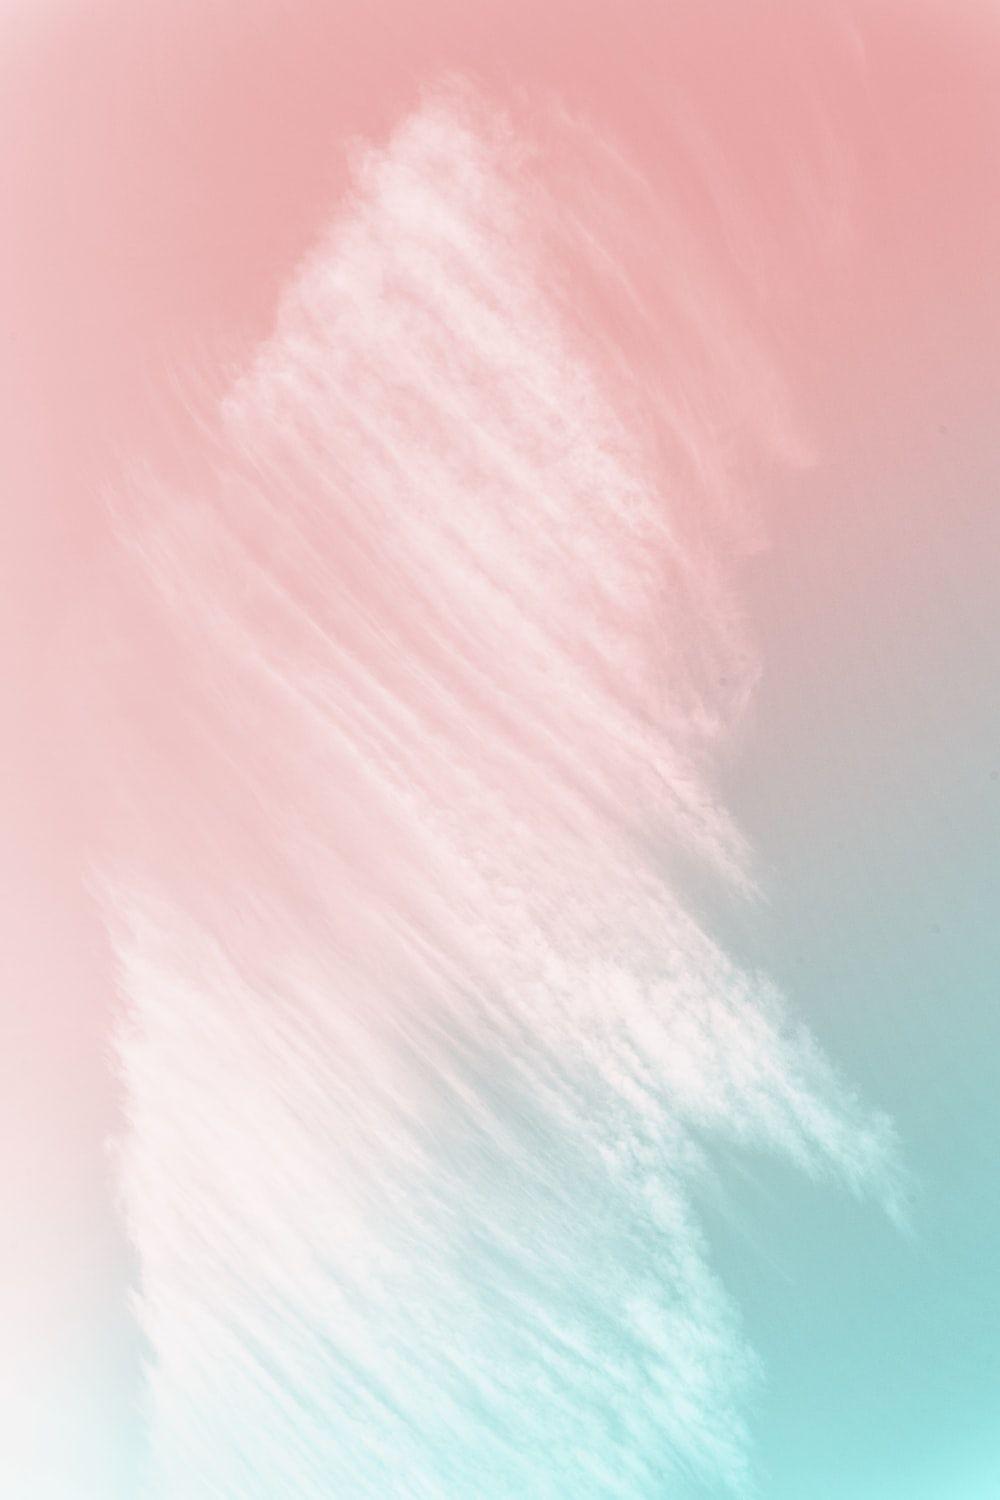 Pastel Colors Wallpapers Top Free Pastel Colors Backgrounds Wallpaperaccess Find & download free graphic resources for pastel. pastel colors wallpapers top free